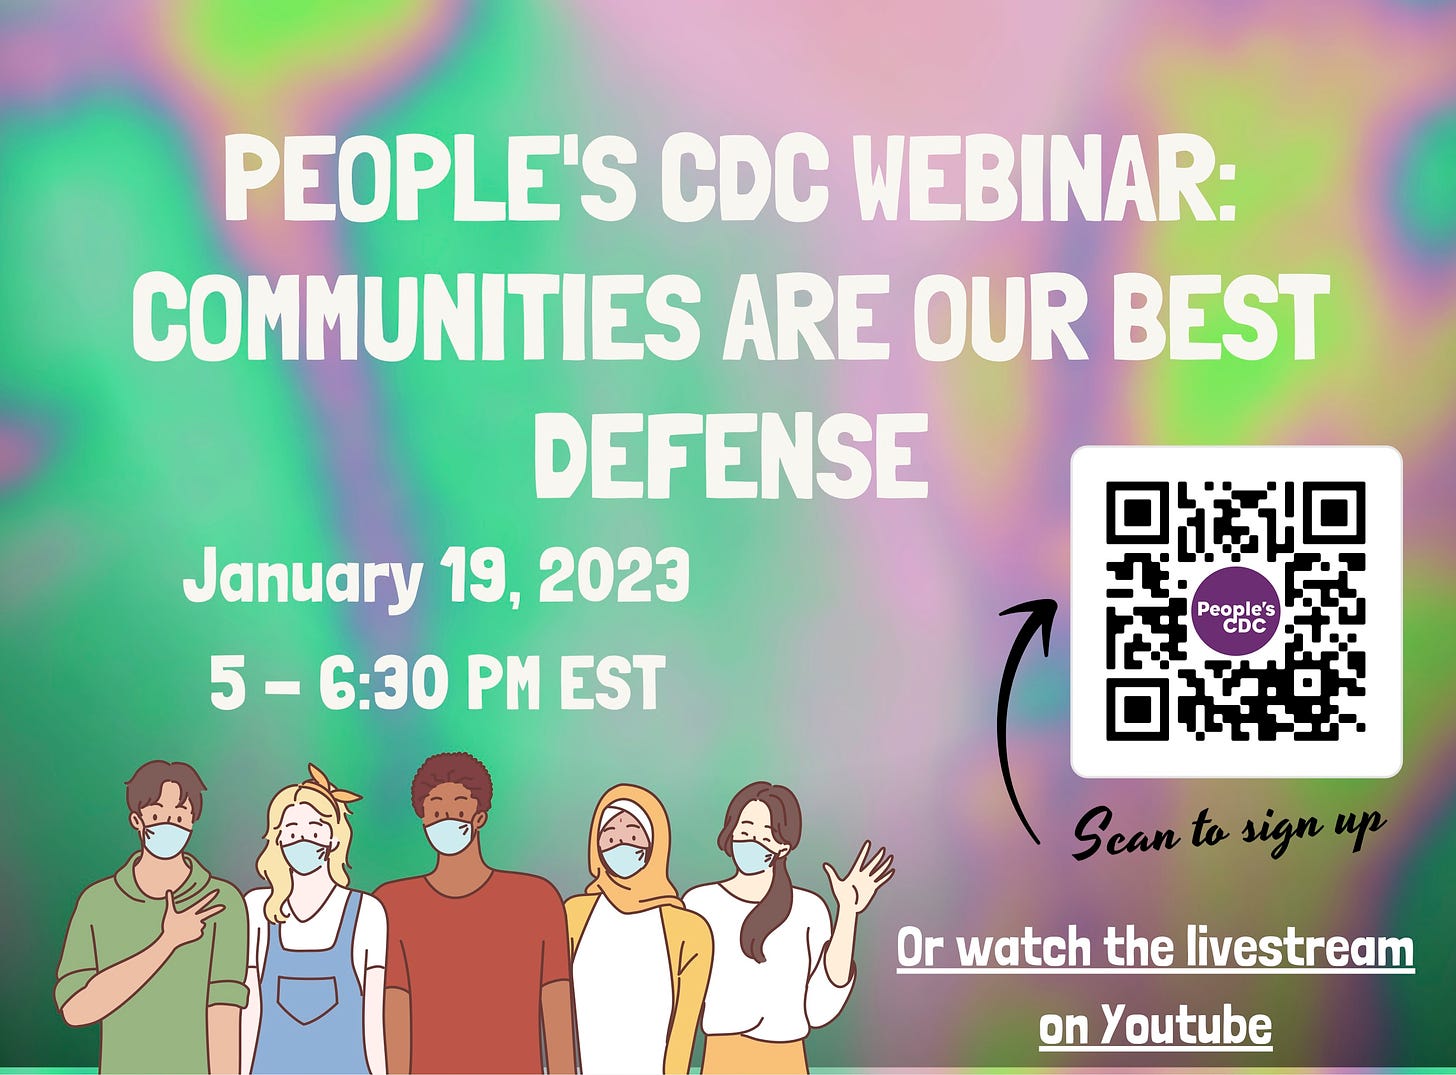 Illustration depicts a group of five young adults with varying skin tones and genders with masks, some waving or motioning to the viewer. Title and subtitle read: “People’s CDC Webinar: Communities Are Our Best Defense”. Date and time read: “January 19, 2023, 5 to 6:30PM EST”. A scannable QR code appears in the lower right with the phrase "or watch the livestream on youtube" below